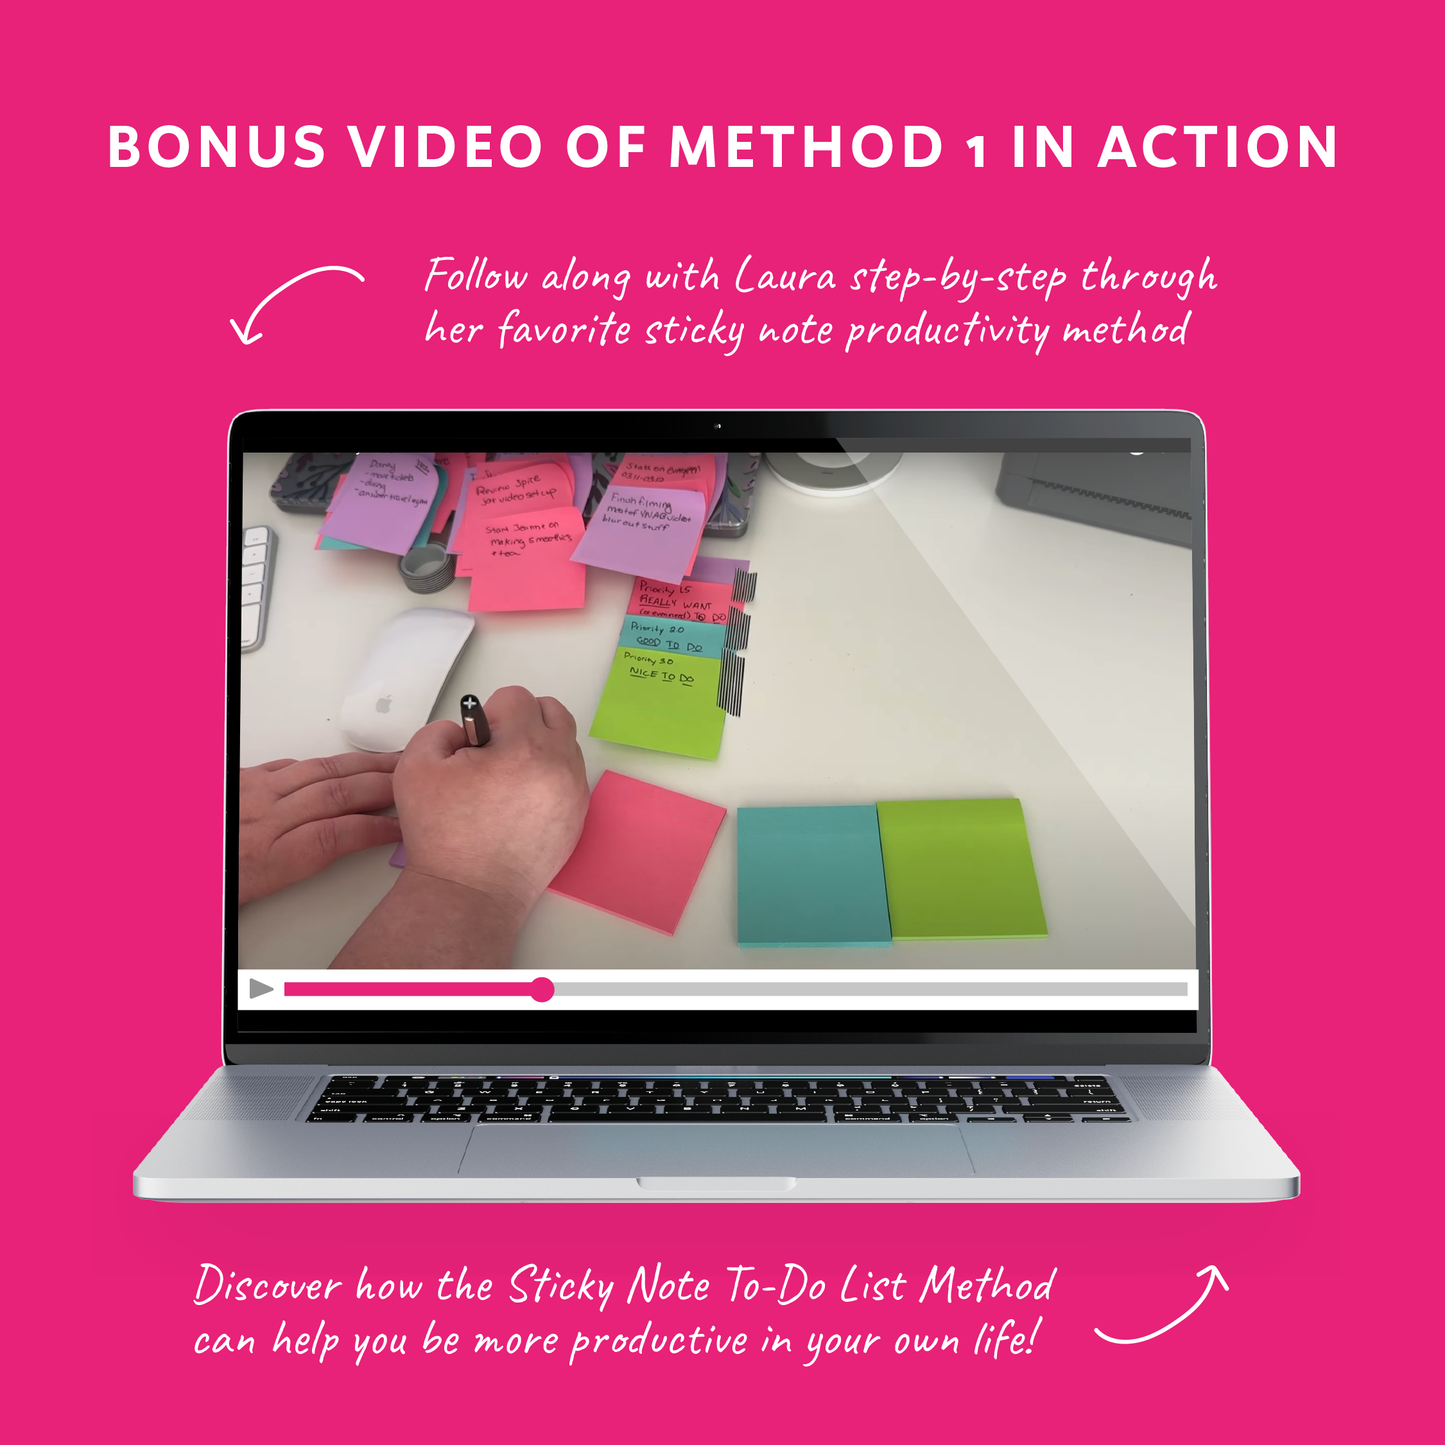 The Ultimate Guide to Sticky Note Productivity